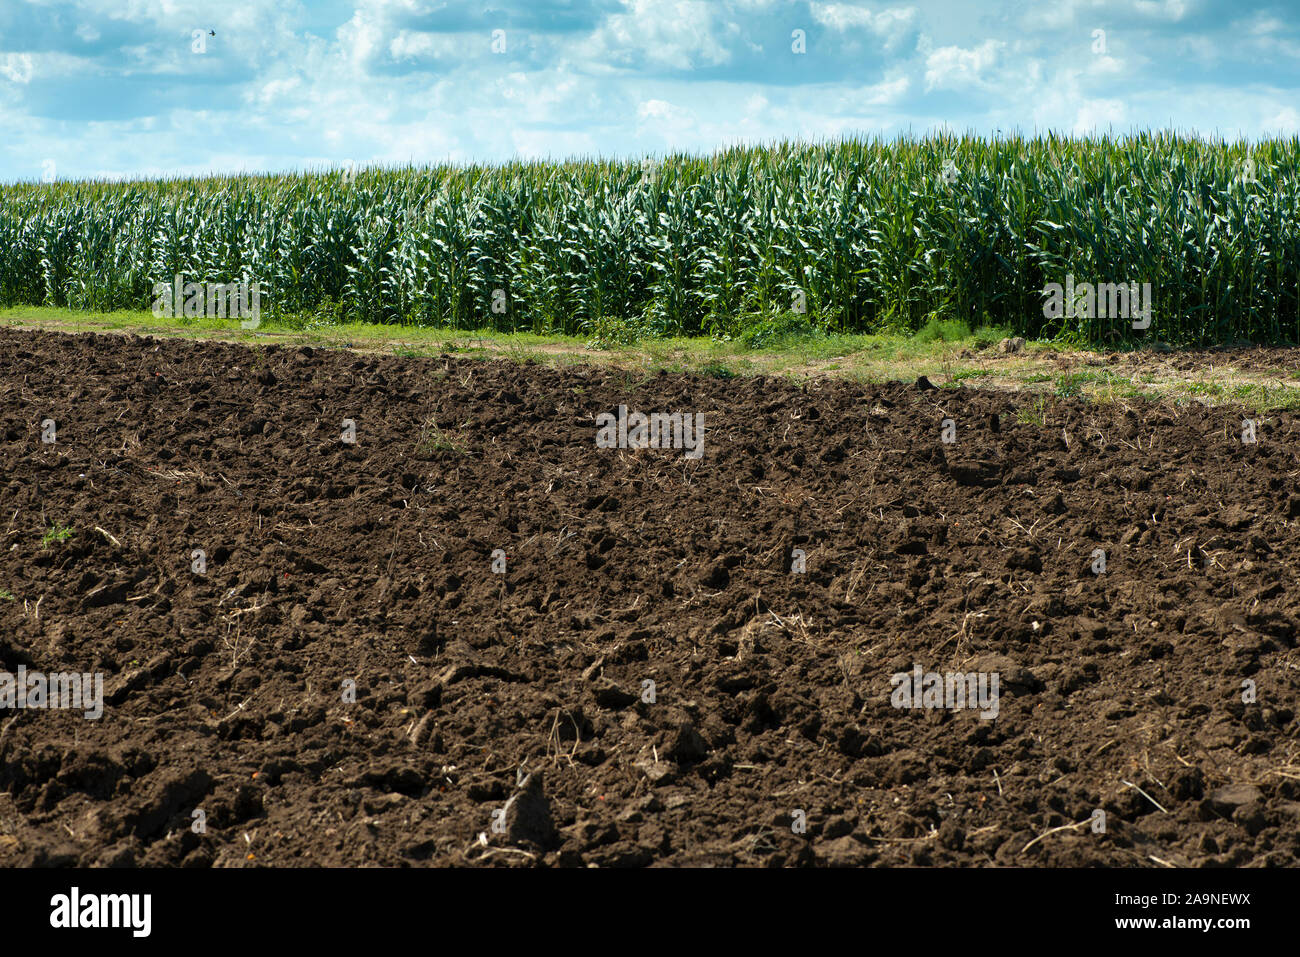 Plowed soil and plantations with corn in the background. Agriculture corn farm. Stock Photo